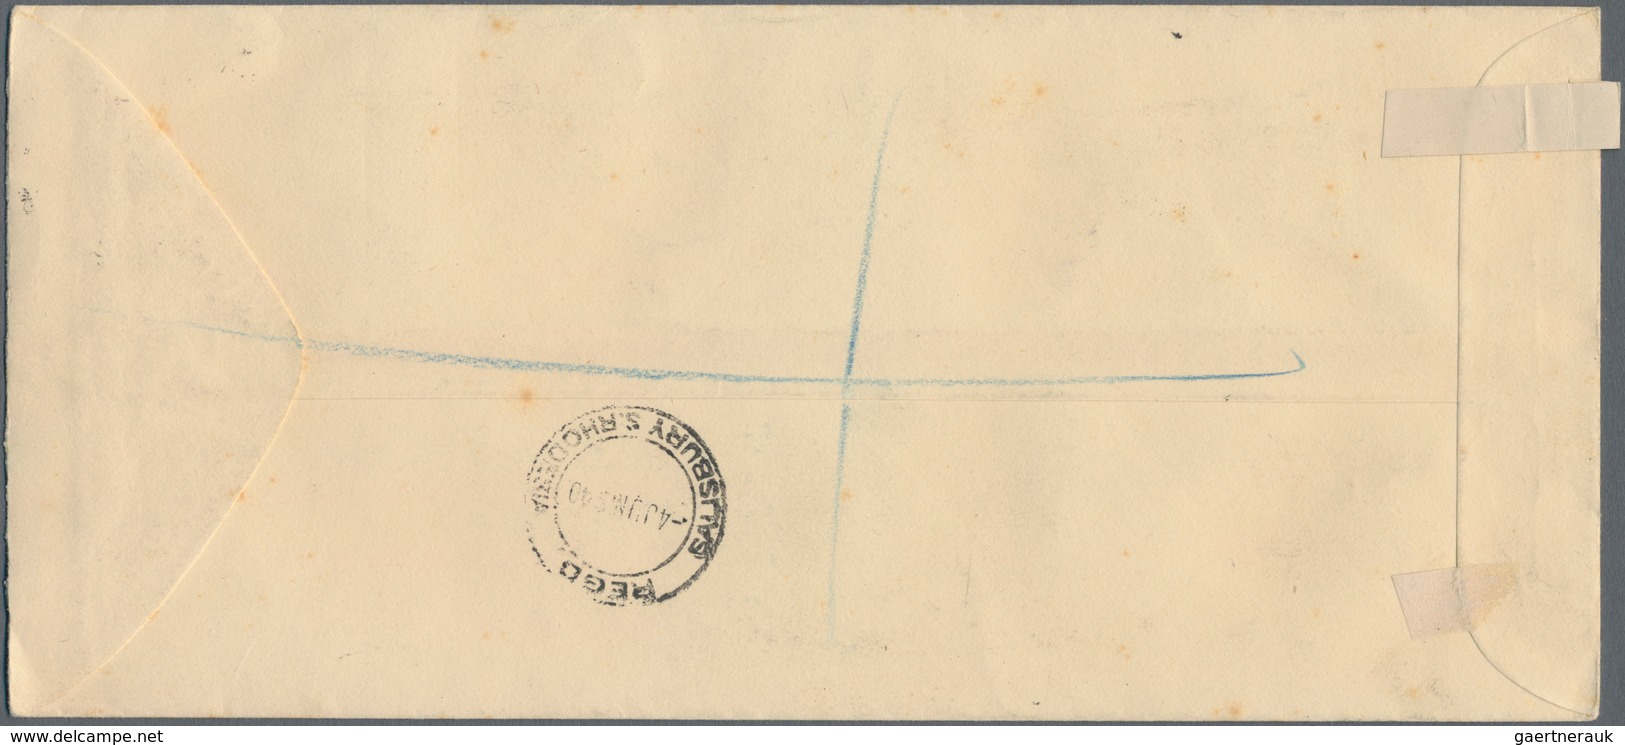 Süd-Rhodesien: 1940 Registered Cover With Full Set Of 8 Stamps Half A Penny To One Shilling On The O - Southern Rhodesia (...-1964)